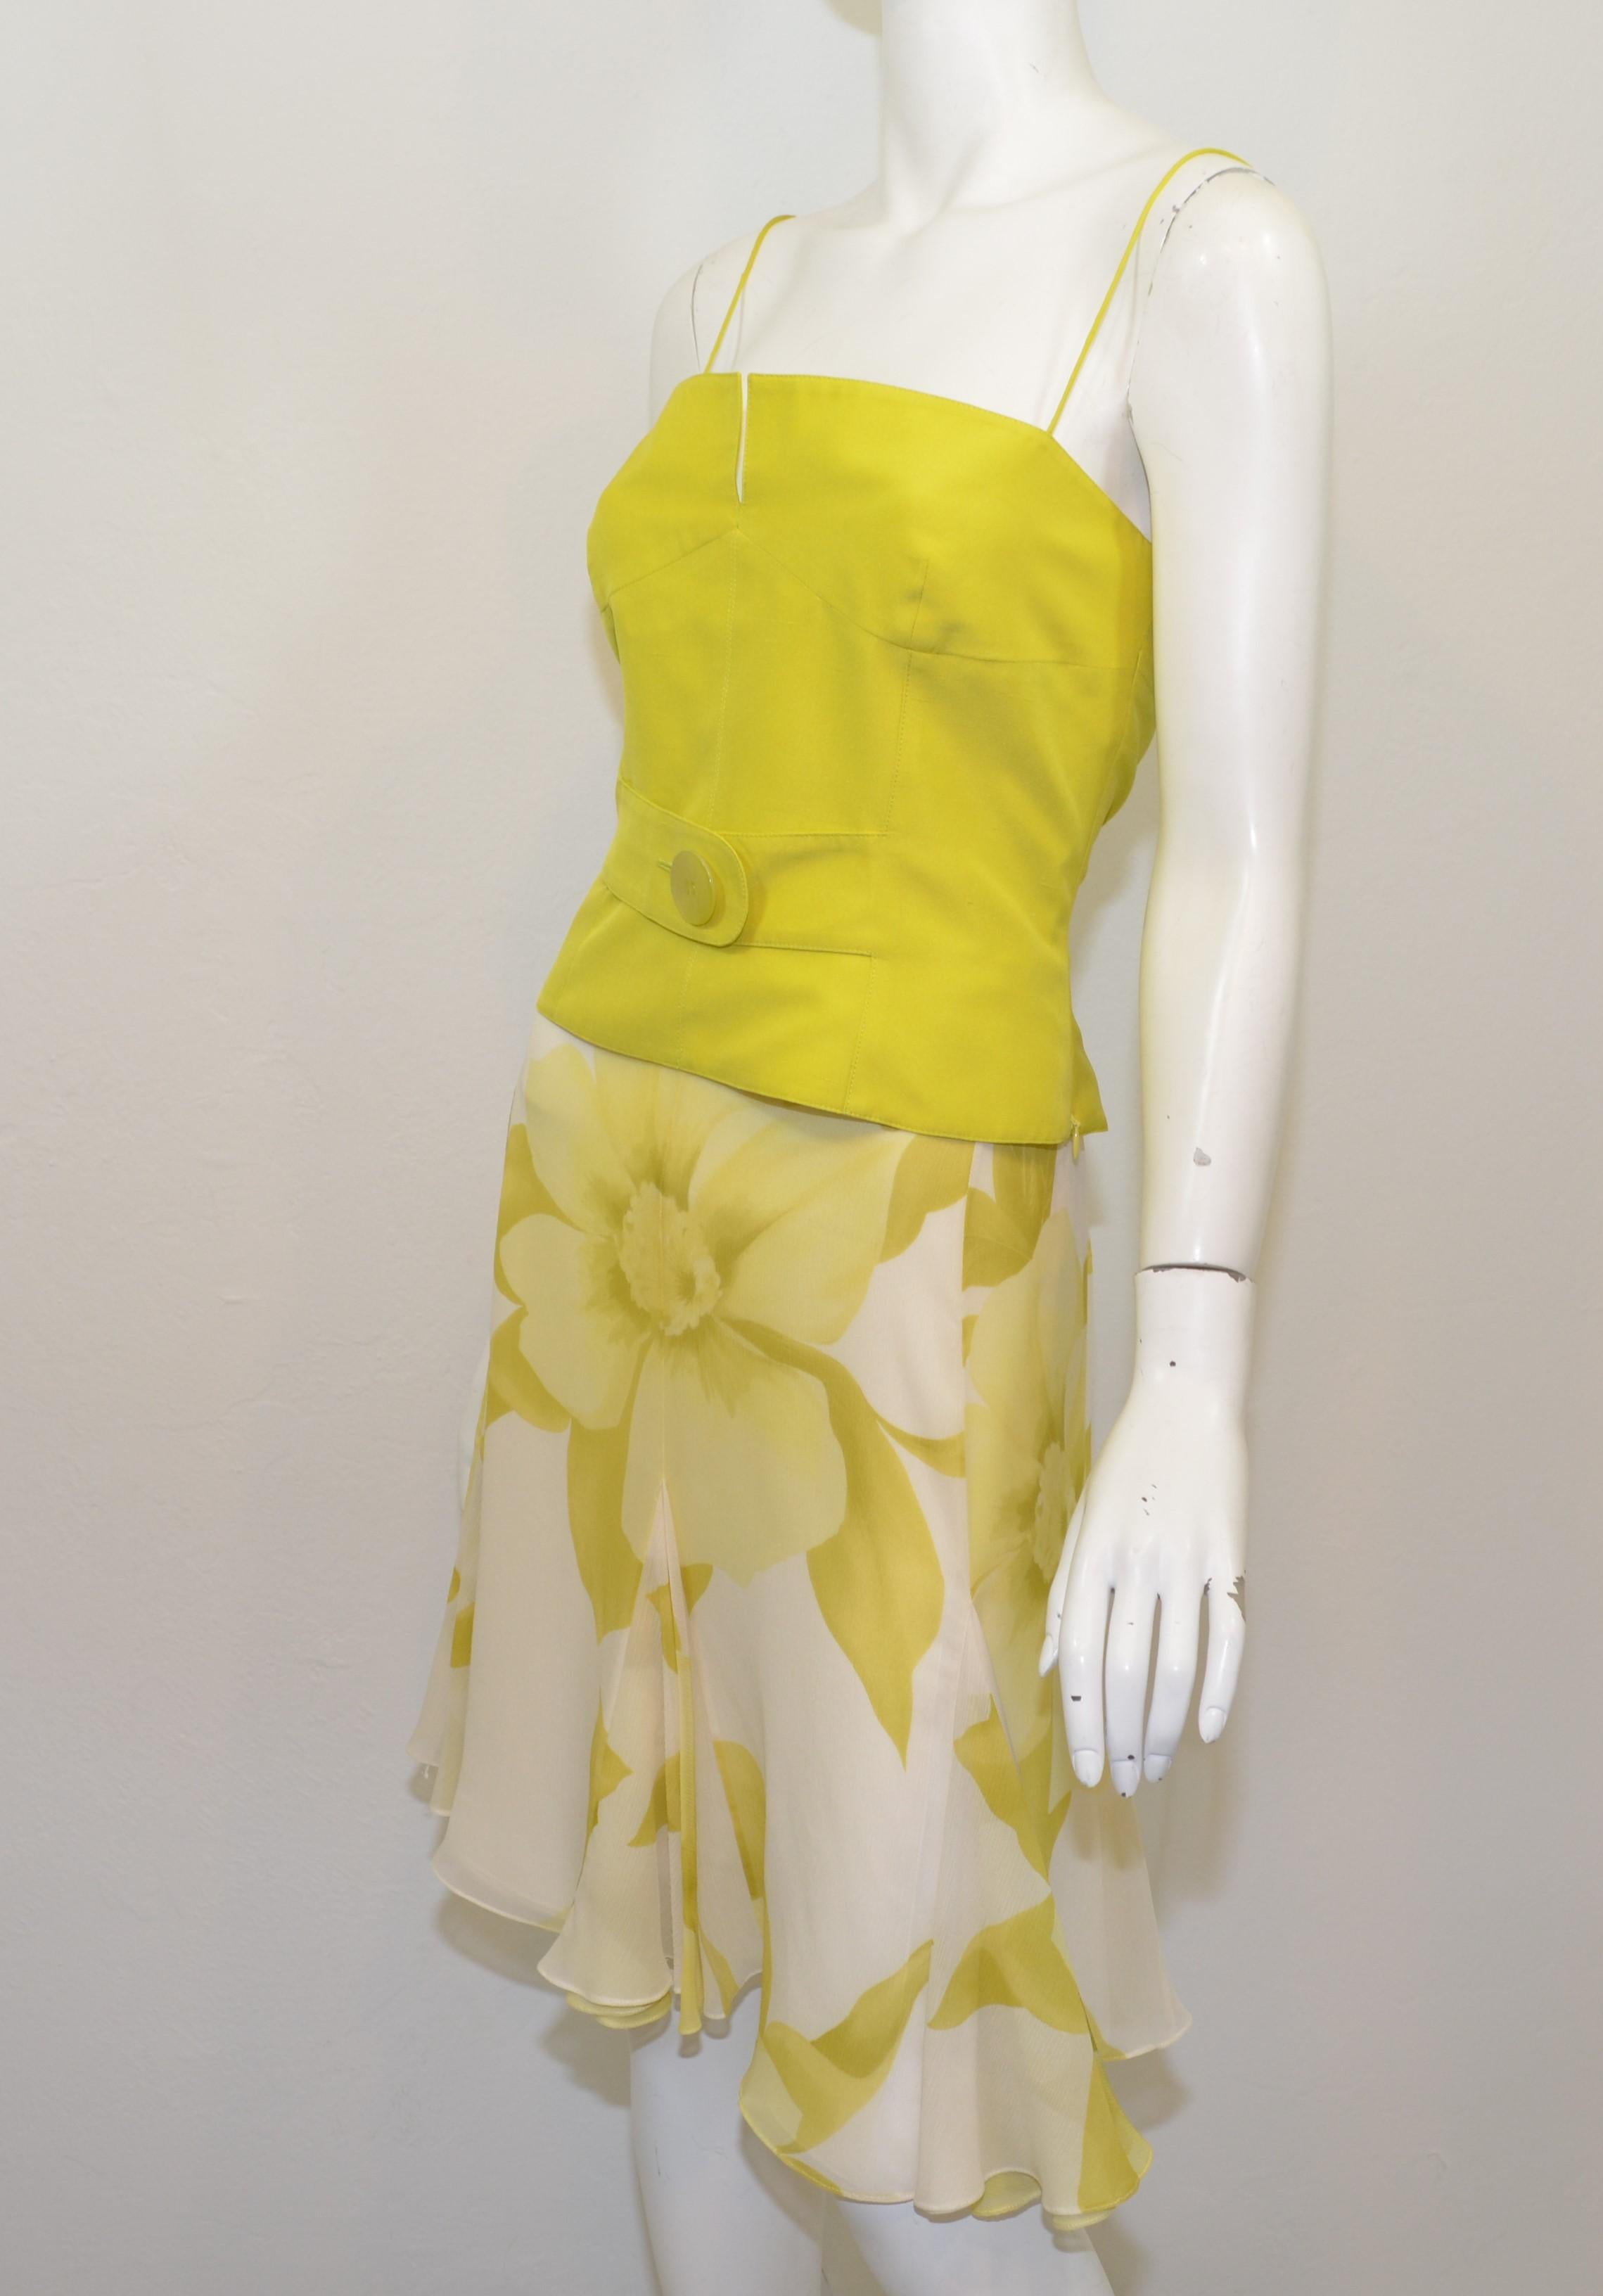 Valentino Lime Green Chiffon Skirt with Camisole Top — Top featured in a chartreuse green color with a decorative belted front and side zipper fastening. Skirt has a floral motif throughout with a flared hem, and a back zipper and hook fastening.